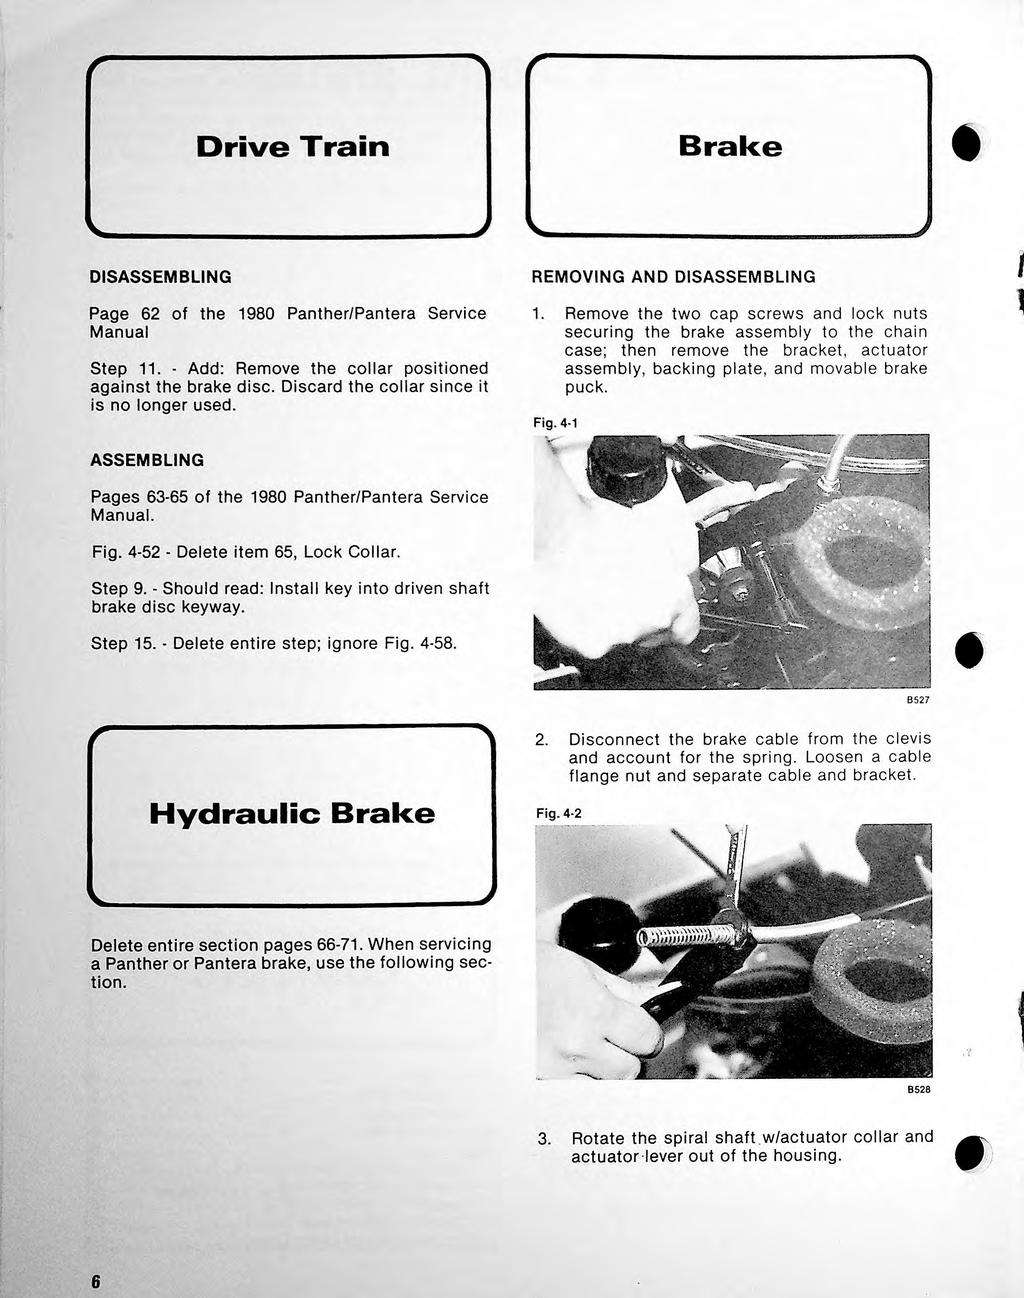 Drive Train Brake DSASSEMBLNG Page 62 of the 1980 Panther/Pantera Service Manua Step 11. - Add: Remove the coar positioned against the brake disc. Discard the coar since it is no onger used.